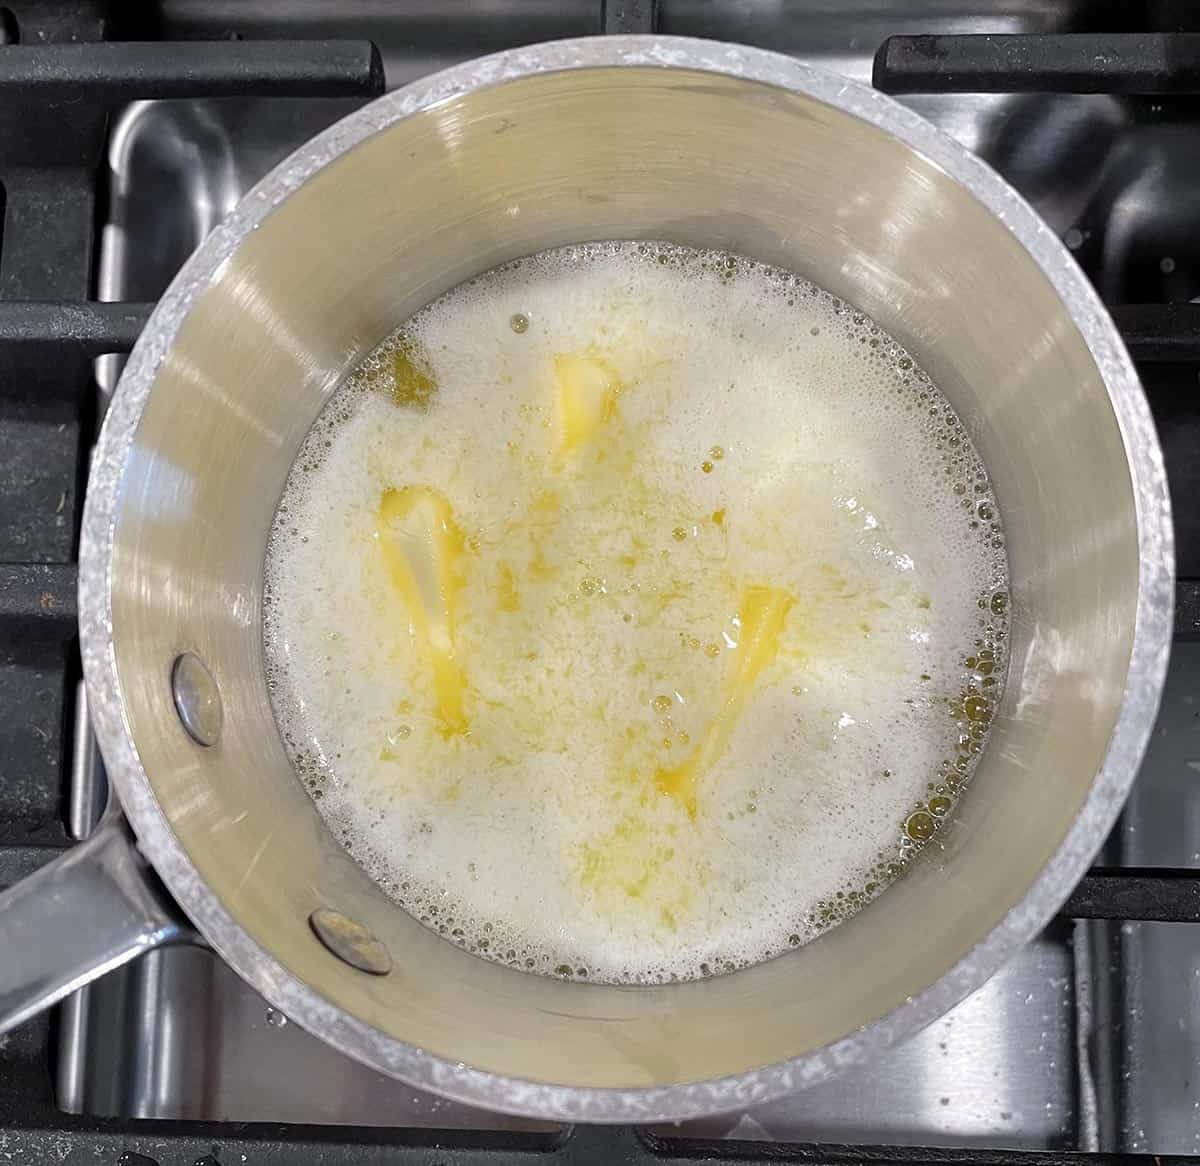 Butter melting in a small sauce pan on a stove.